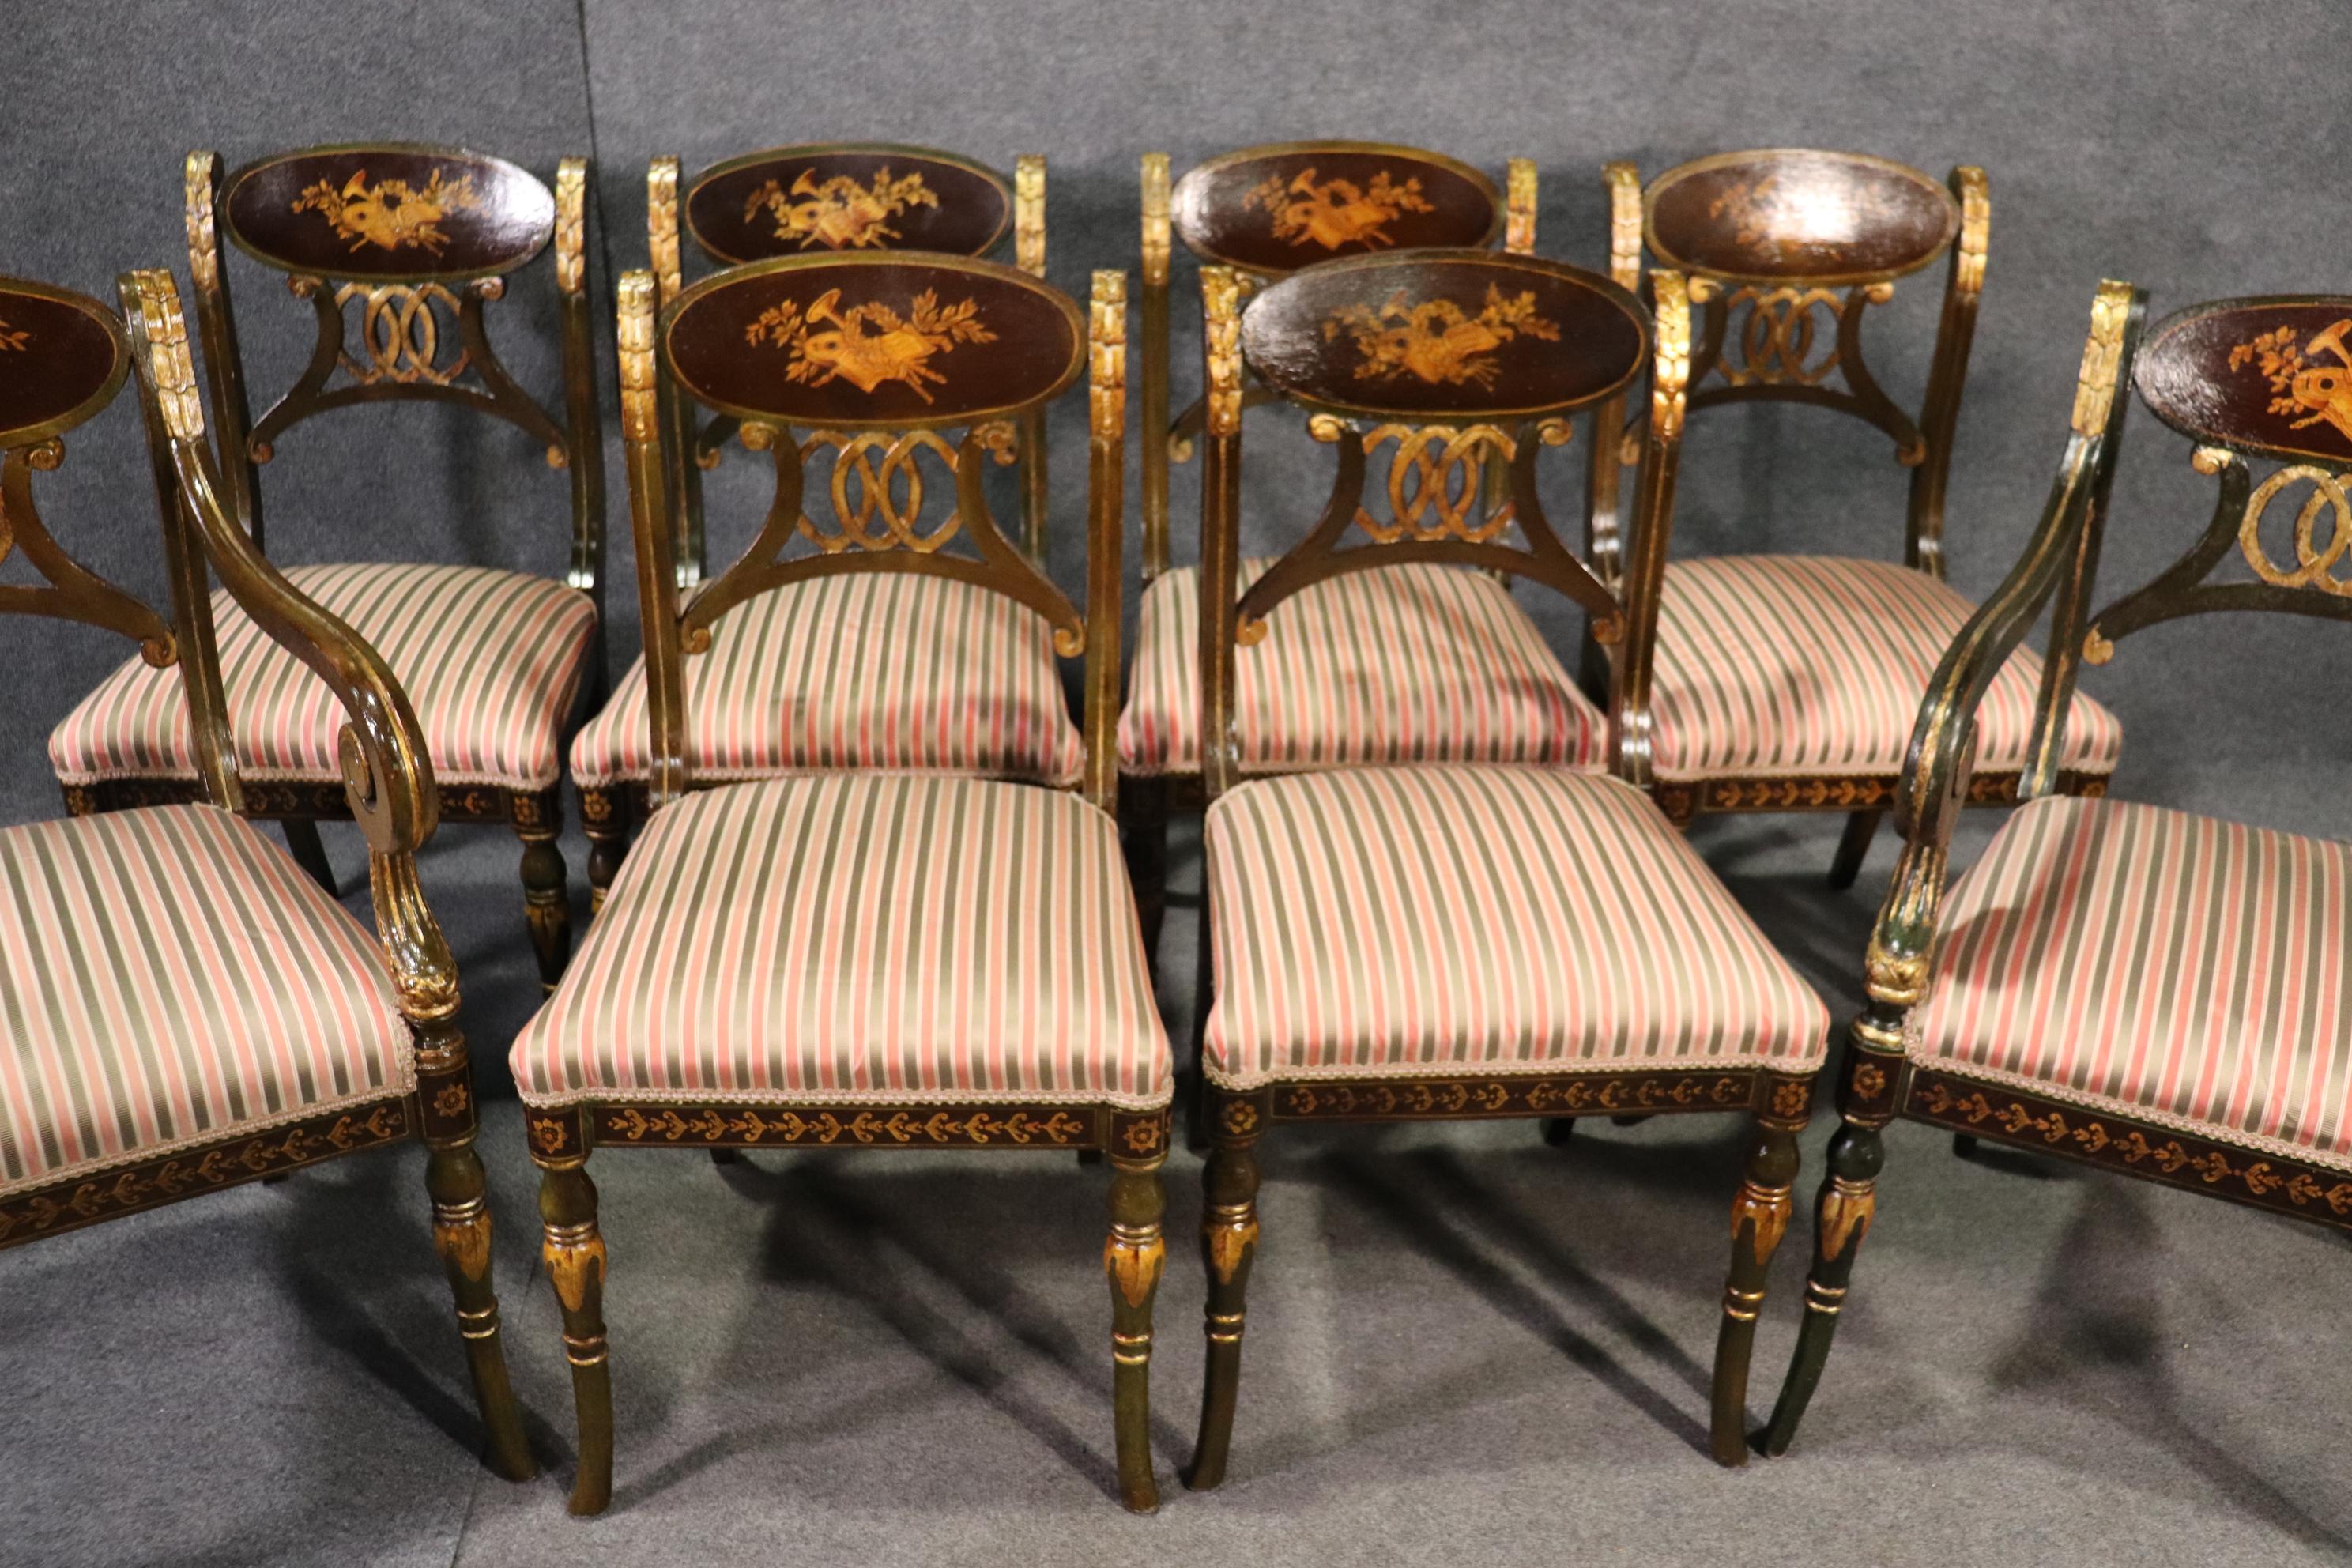 English Set 8 Painted and Gilded Regency Style Dining Chairs with Musical Instruments 